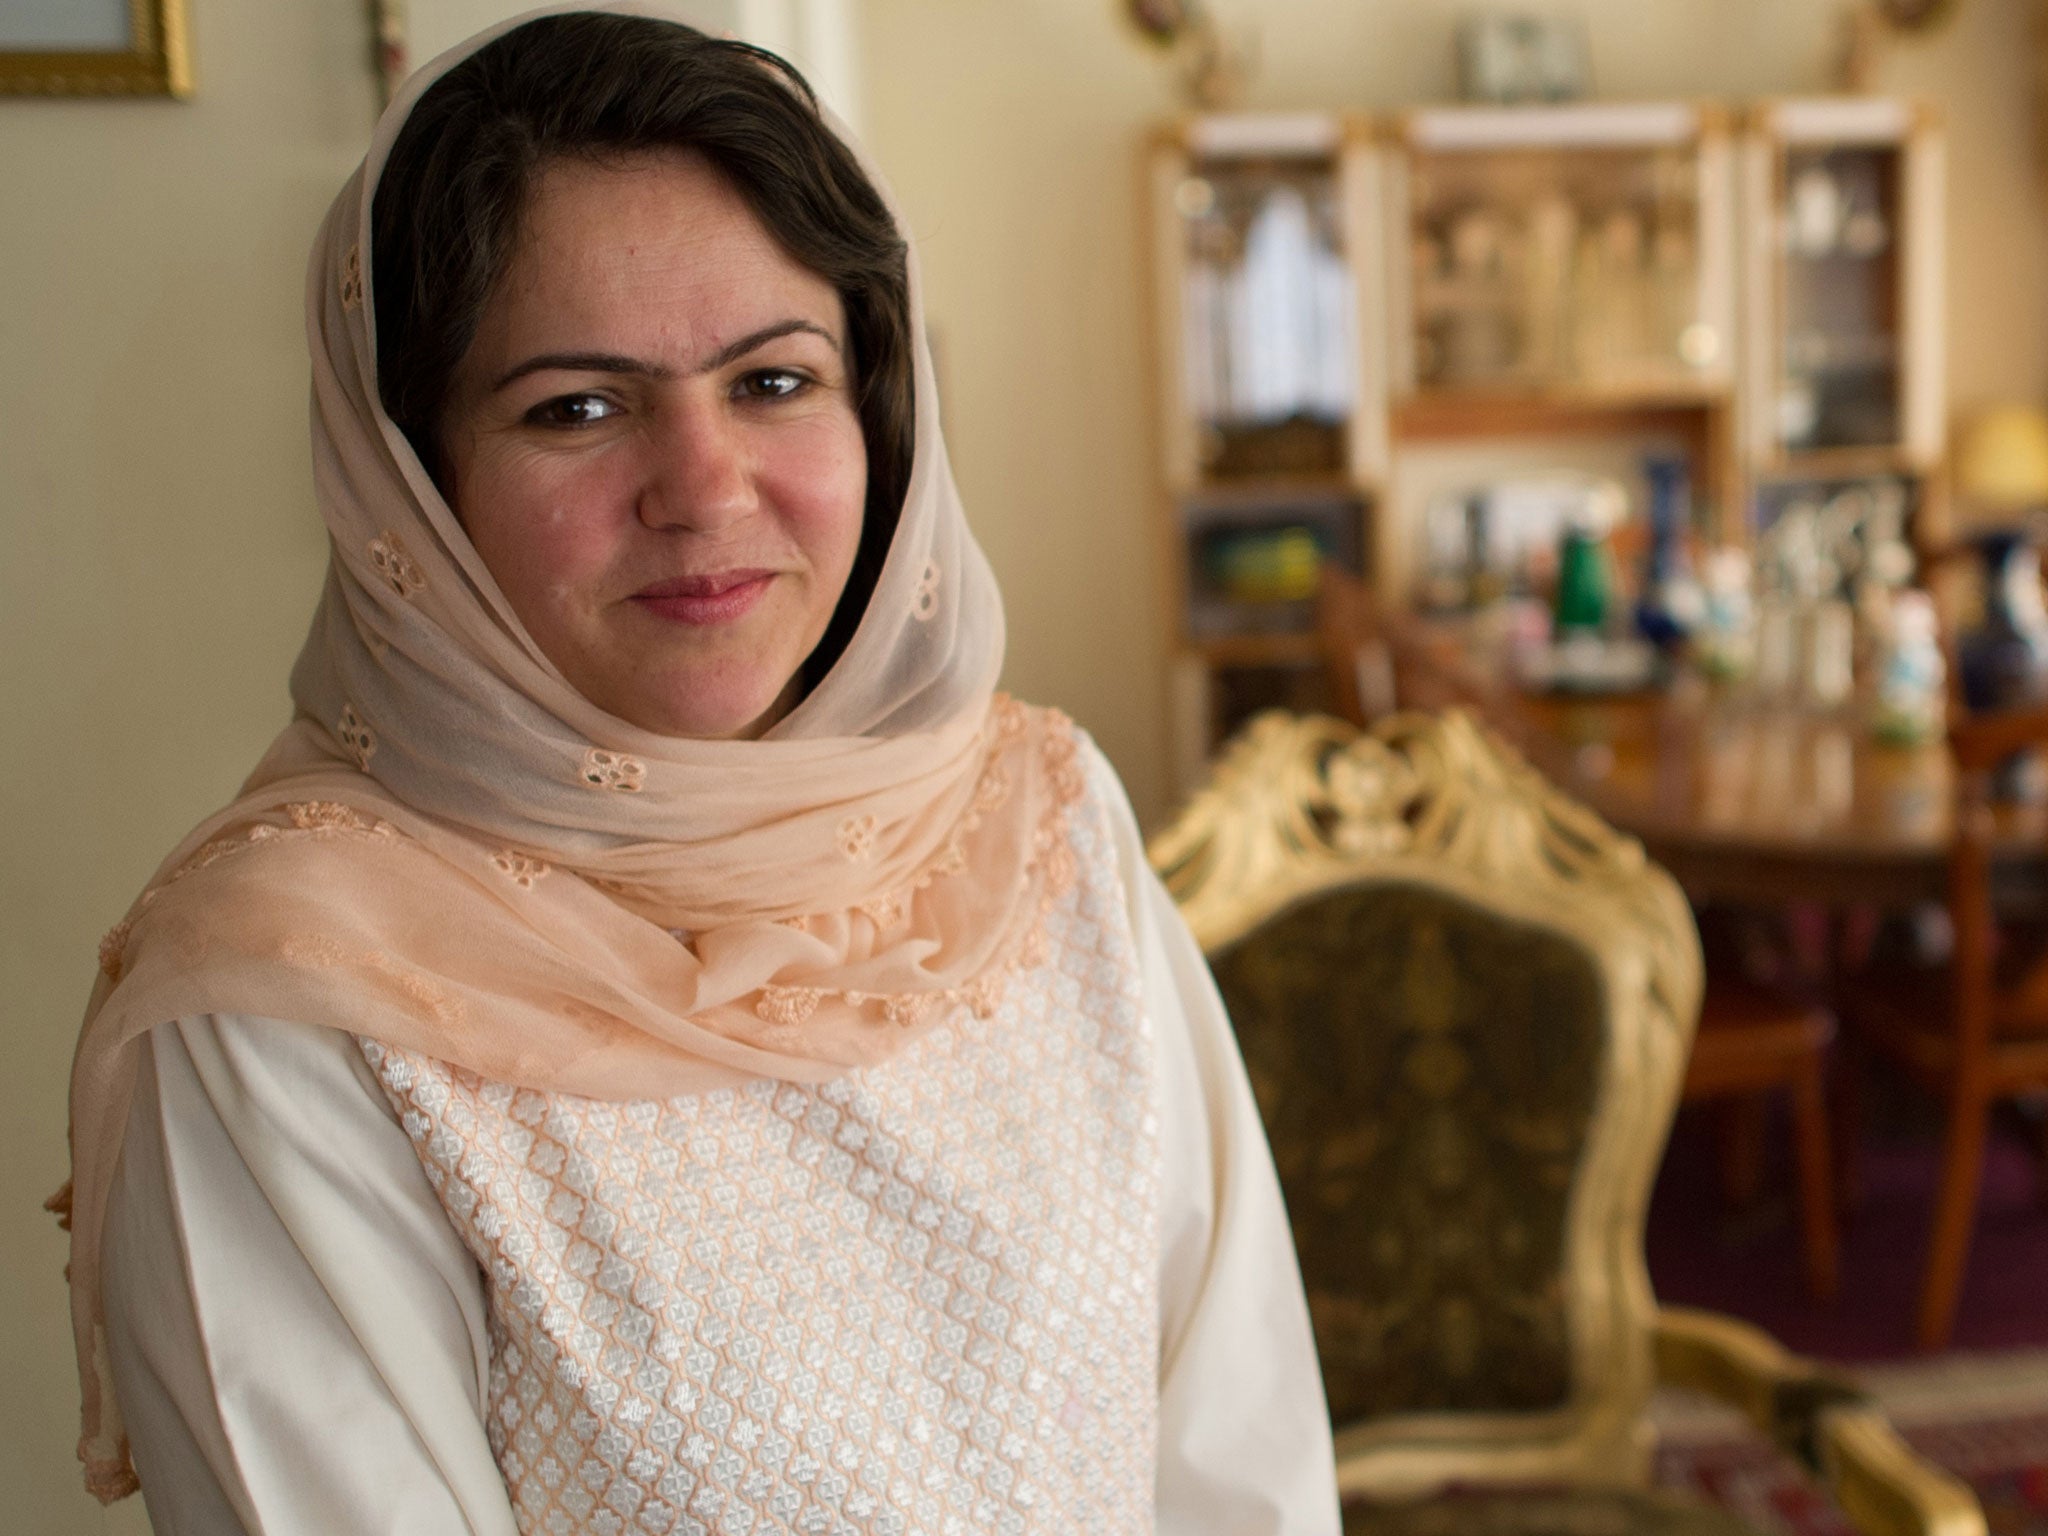 Women’s rights activist Fawzia Koofi wanted the Afghan parliament to enshrine the decree in law so that future governments will not be able to repeal it